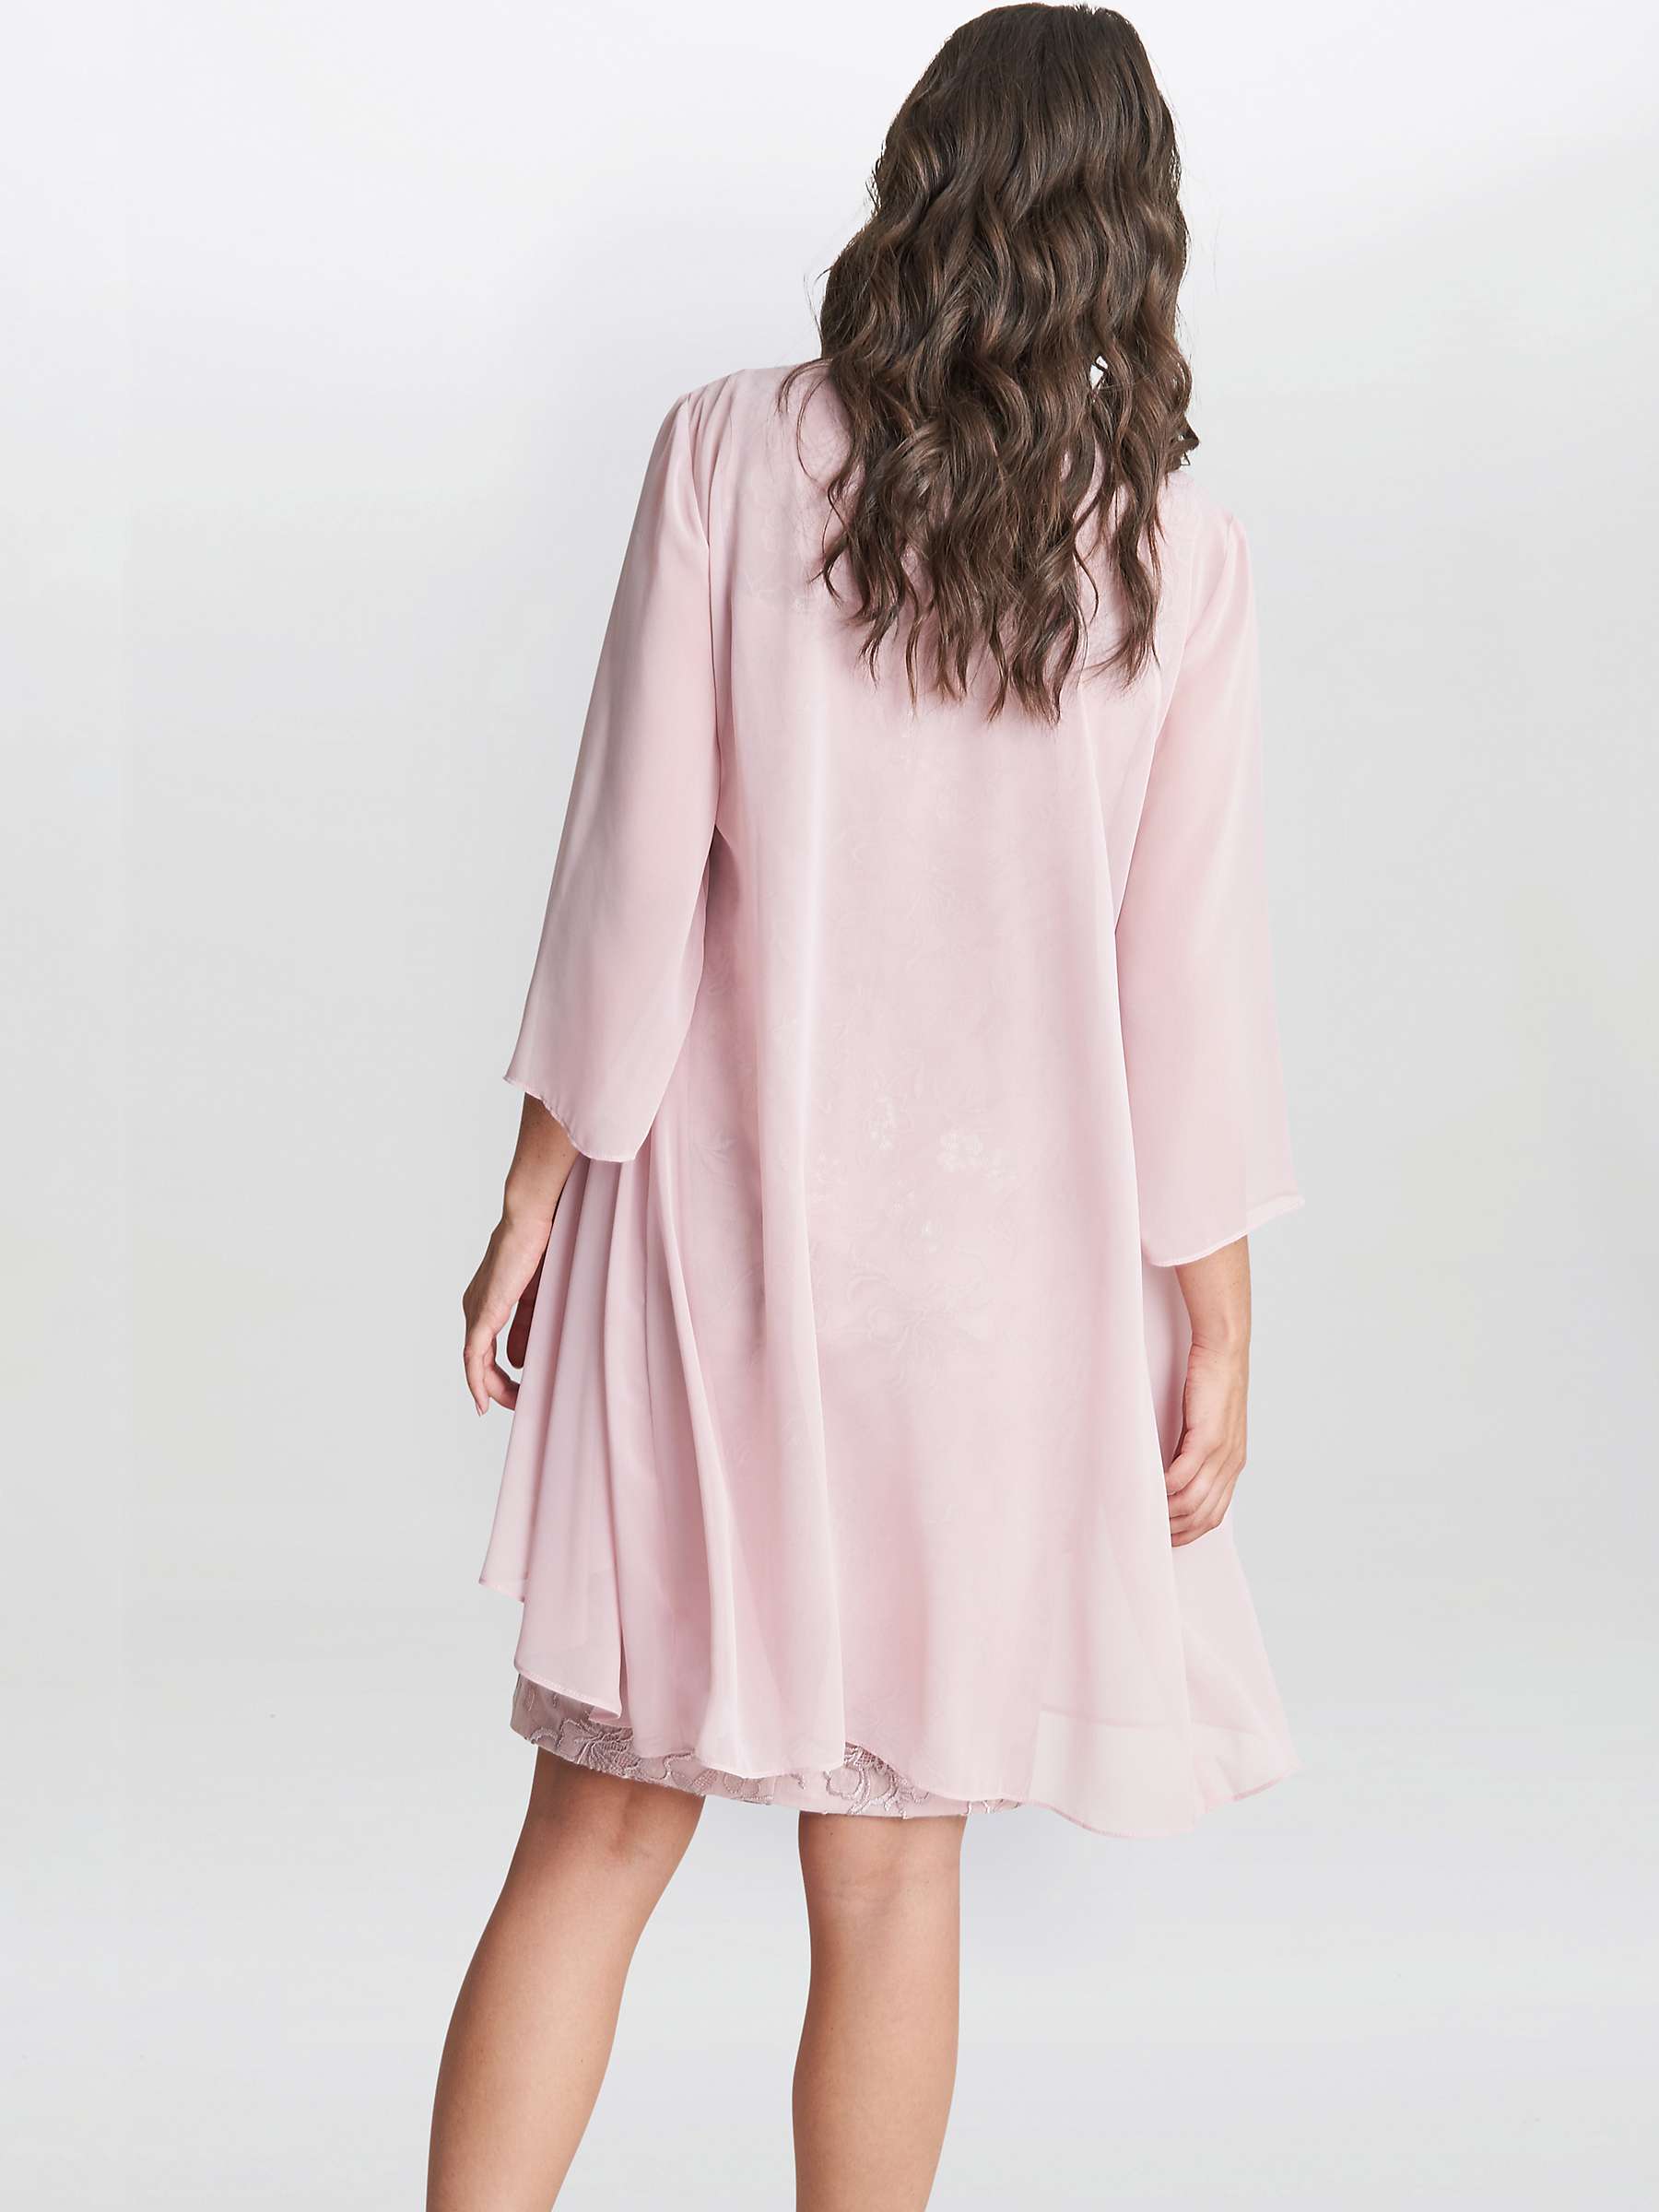 Buy Gina Bacconi Hayley Embroidered Dress, Rose Pink Online at johnlewis.com